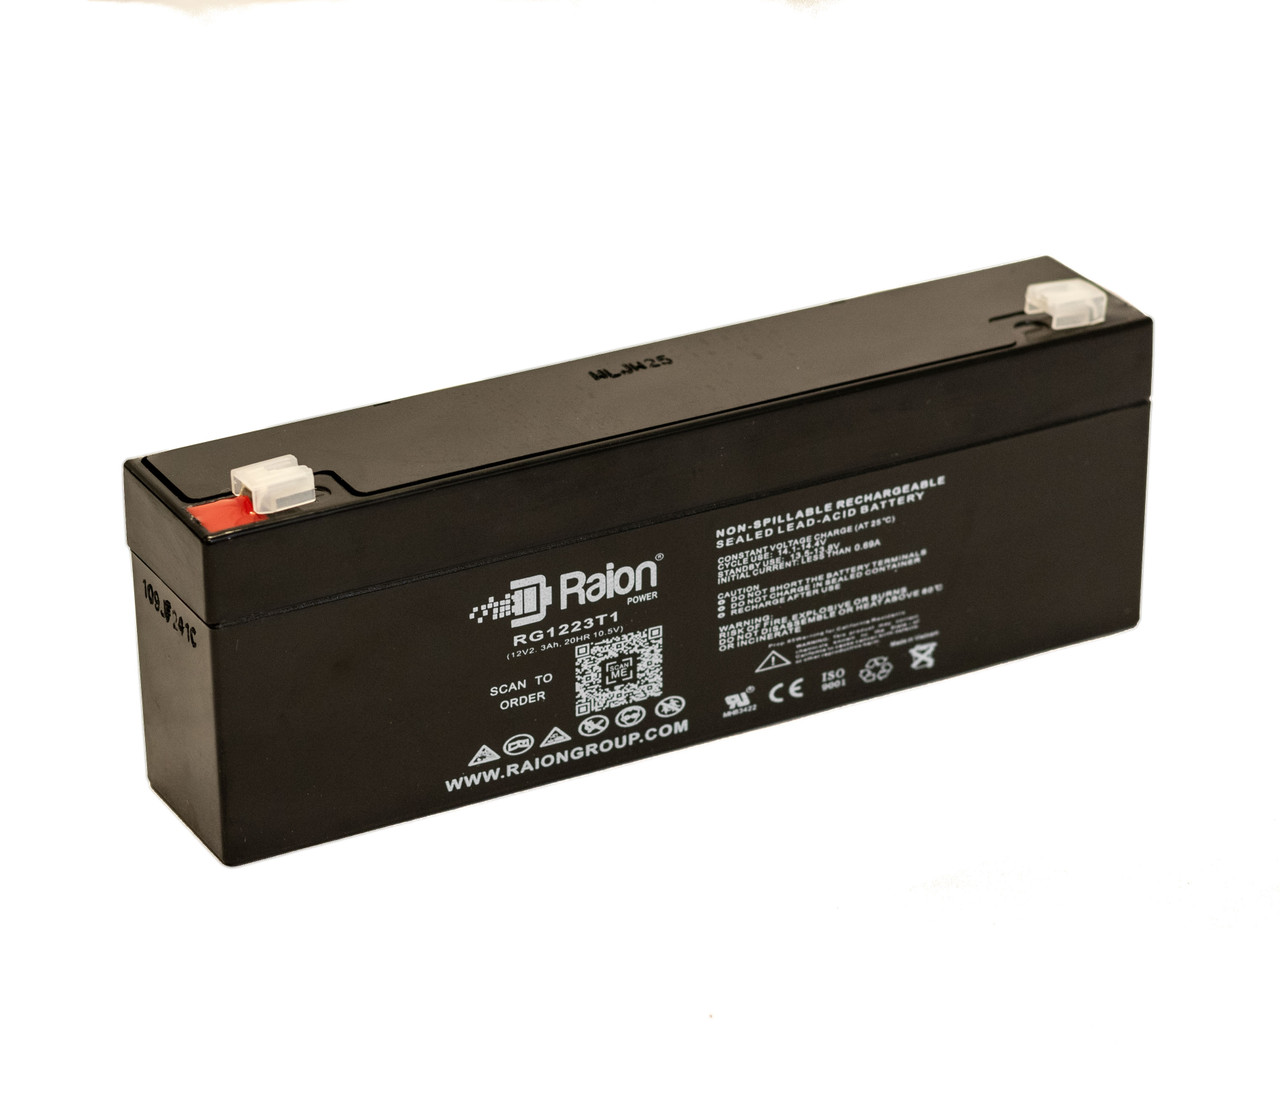 Raion Power RG1223T1 Replacement Battery for Crown Battery 12CE2.3